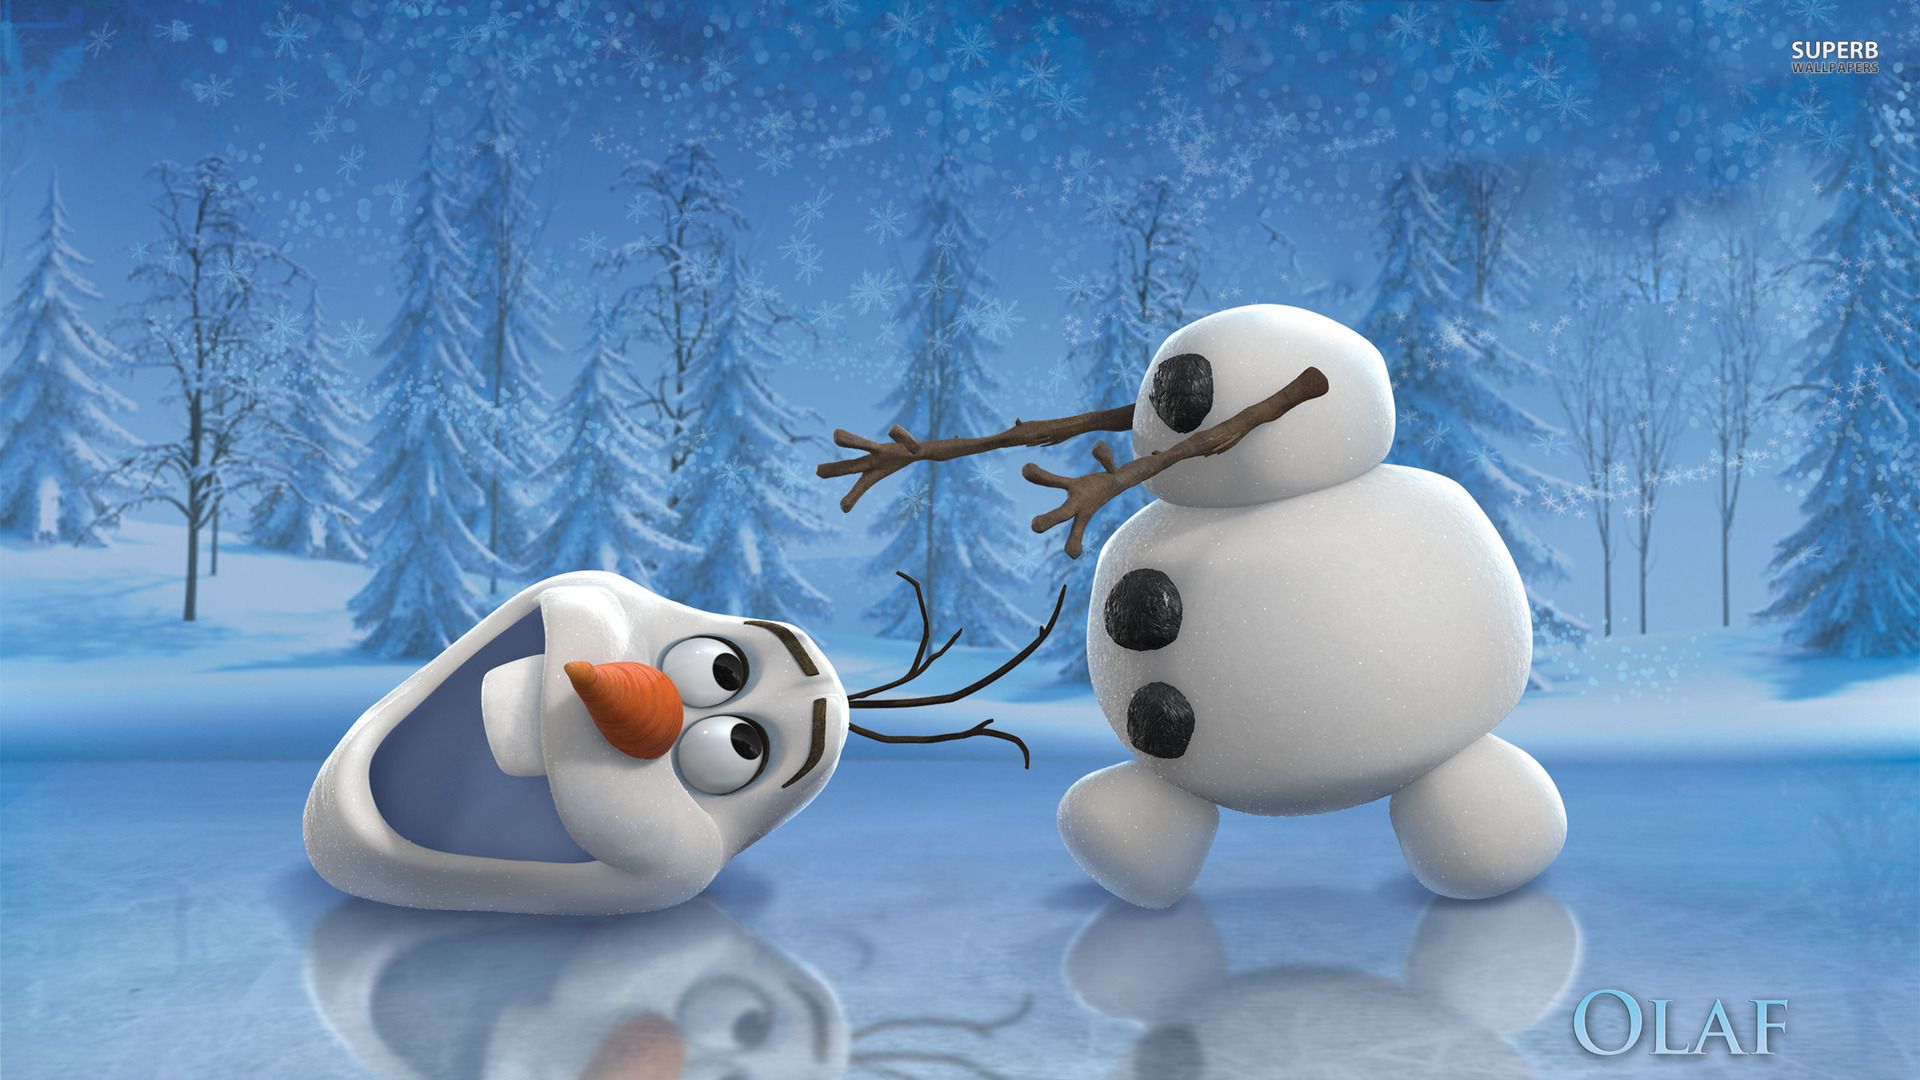 Free download Funny Olaf in Frozen Movie Exclusive HD Wallpaper [1920x1080] for your Desktop, Mobile & Tablet. Explore Olaf Christmas Wallpaper. Disney Frozen Wallpaper, Frozen Wallpaper, Elsa Wallpaper